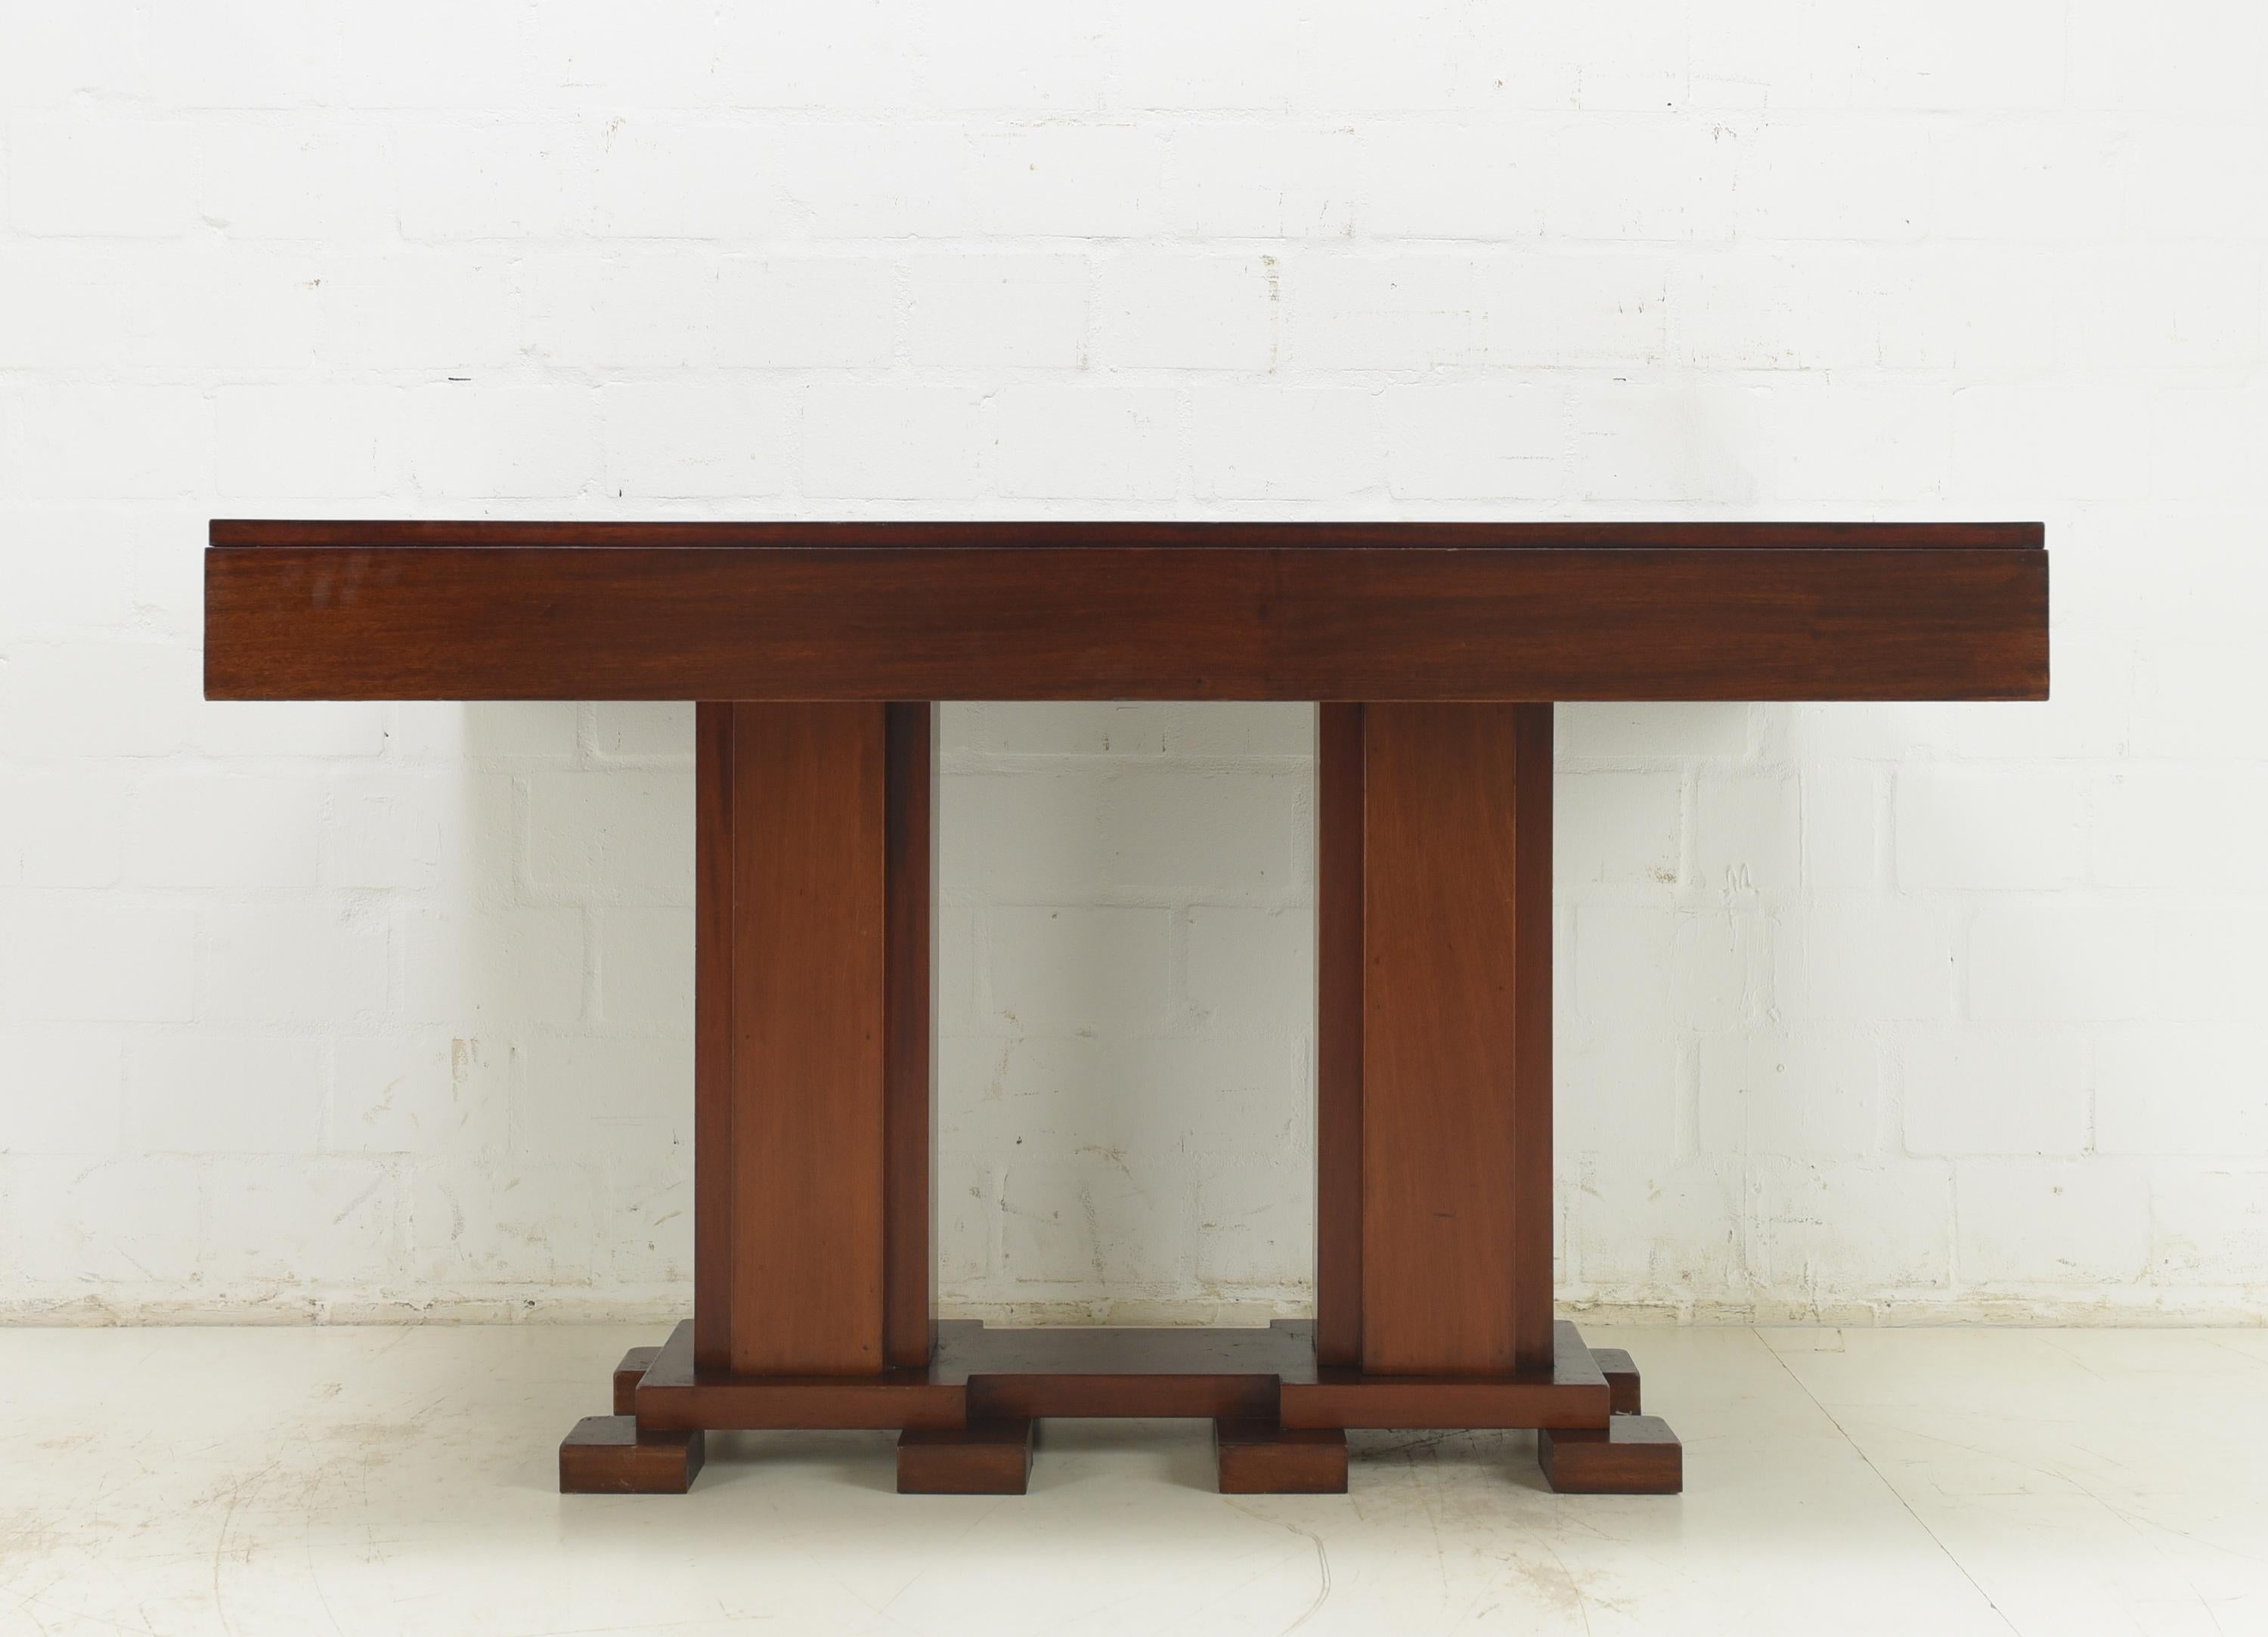 Dining table restored Art Deco circa 1925 mahogany conference table

Features:
Central column feet
Strictly geometric design
Very nice grain
Timelessly modern and stylish
The table cannot be disassembled

Additional information:
Material: